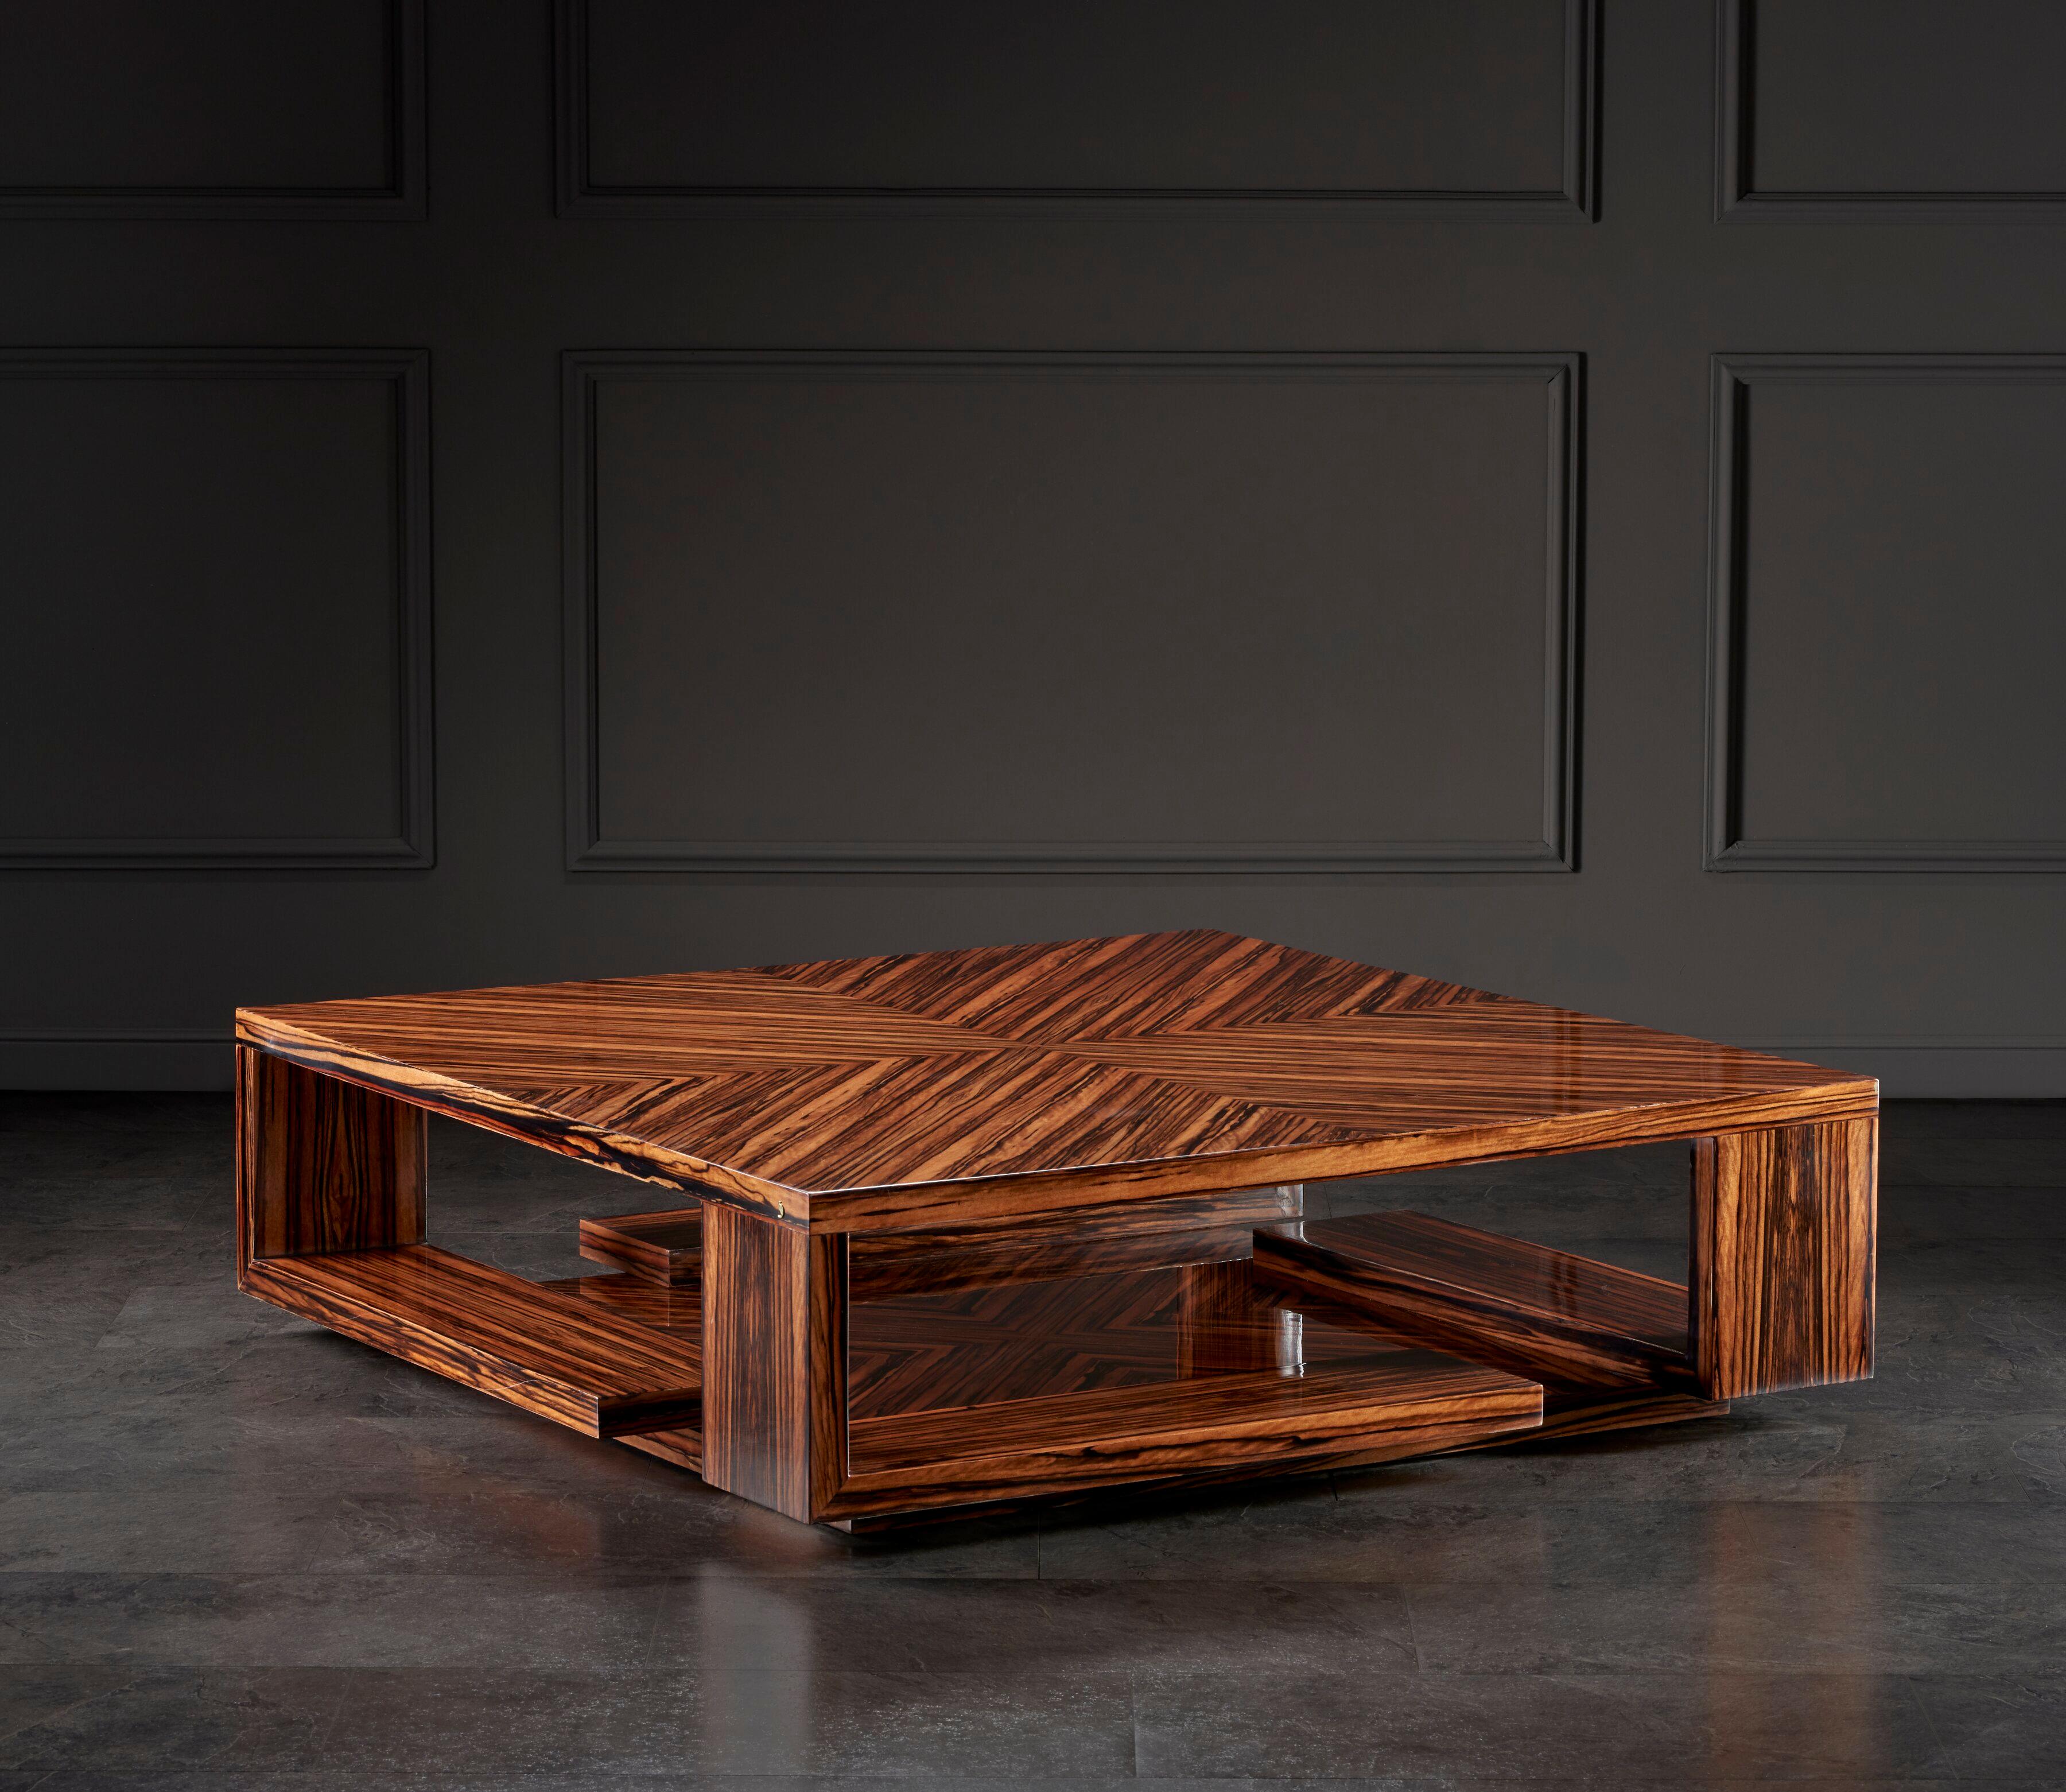 Lyric large coffee table

High quality in material and shape. Its symmetry is given by its harmony folded from geometric elements. Its horizontal and vertical forms are similar to the rules of the golden ratio as all of its elements merge into a